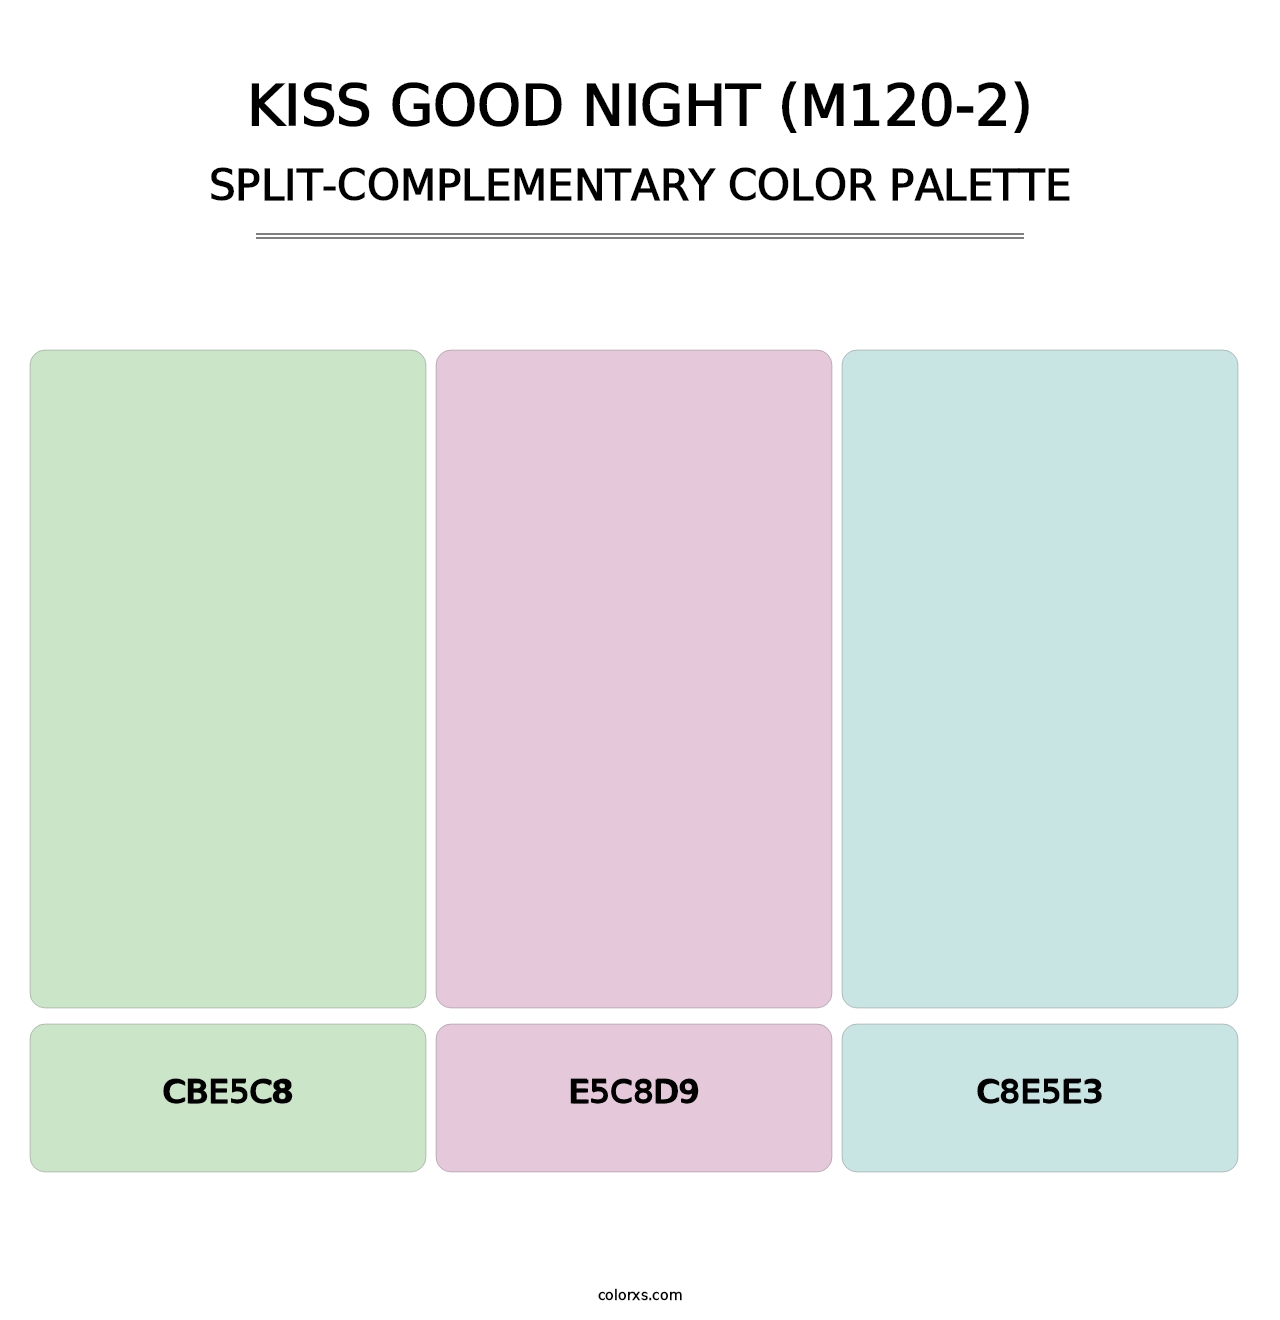 Kiss Good Night (M120-2) - Split-Complementary Color Palette